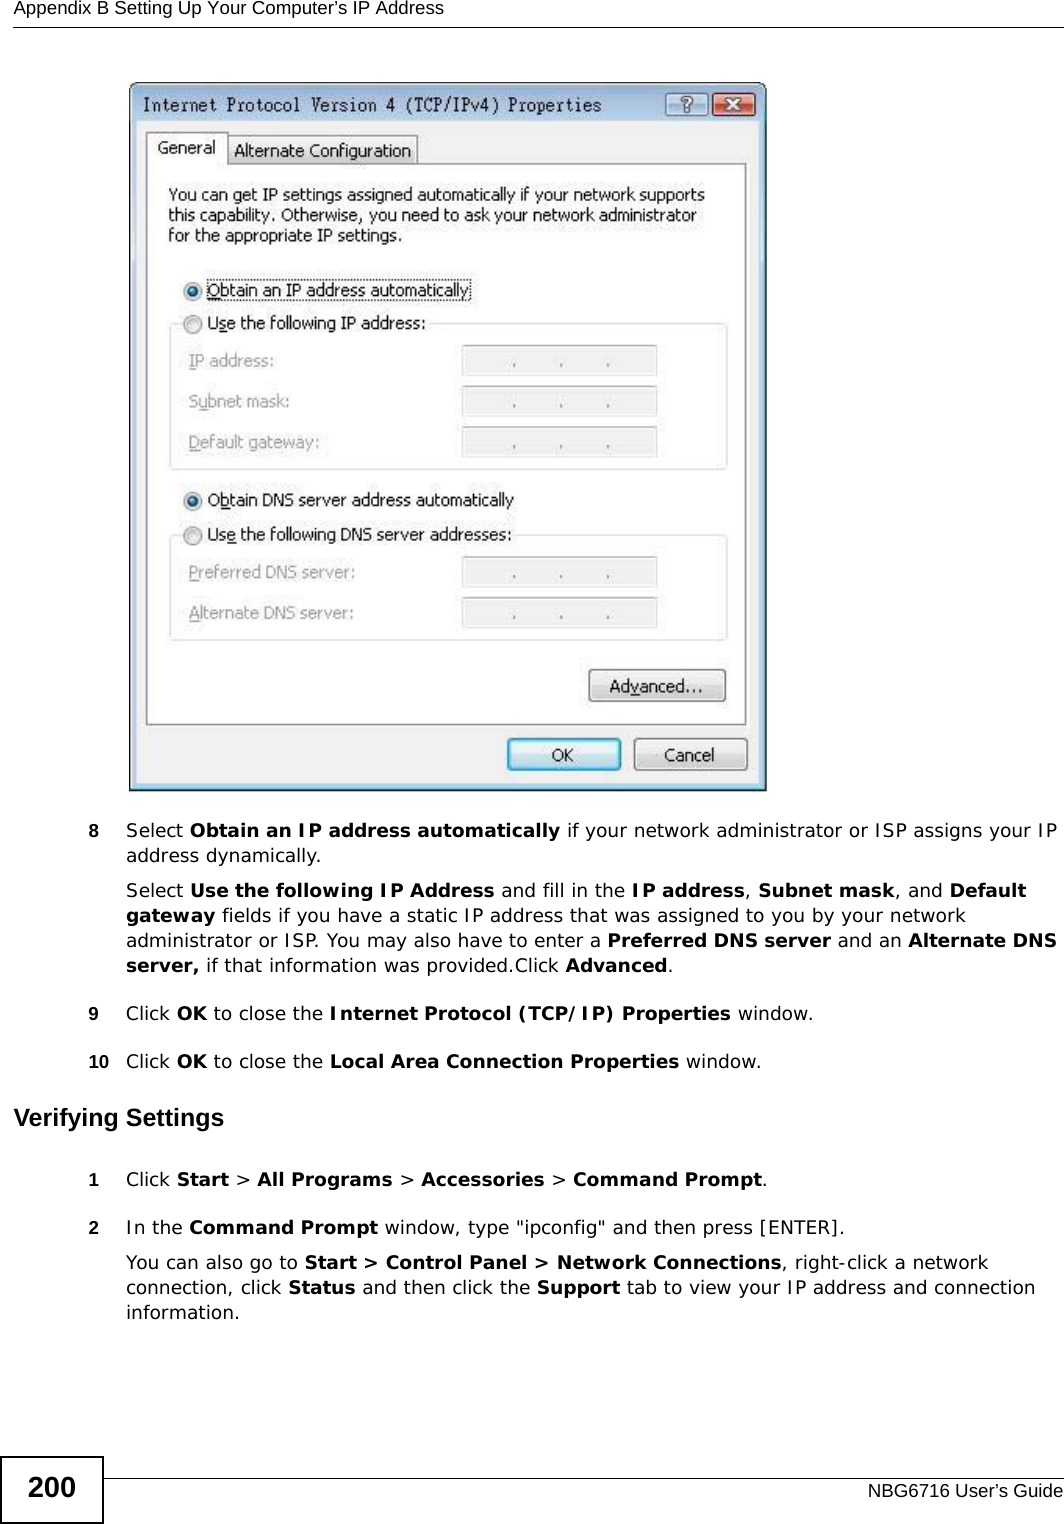 Appendix B Setting Up Your Computer’s IP AddressNBG6716 User’s Guide2008Select Obtain an IP address automatically if your network administrator or ISP assigns your IP address dynamically.Select Use the following IP Address and fill in the IP address, Subnet mask, and Default gateway fields if you have a static IP address that was assigned to you by your network administrator or ISP. You may also have to enter a Preferred DNS server and an Alternate DNS server, if that information was provided.Click Advanced.9Click OK to close the Internet Protocol (TCP/IP) Properties window.10 Click OK to close the Local Area Connection Properties window.Verifying Settings1Click Start &gt; All Programs &gt; Accessories &gt; Command Prompt.2In the Command Prompt window, type &quot;ipconfig&quot; and then press [ENTER]. You can also go to Start &gt; Control Panel &gt; Network Connections, right-click a network connection, click Status and then click the Support tab to view your IP address and connection information.